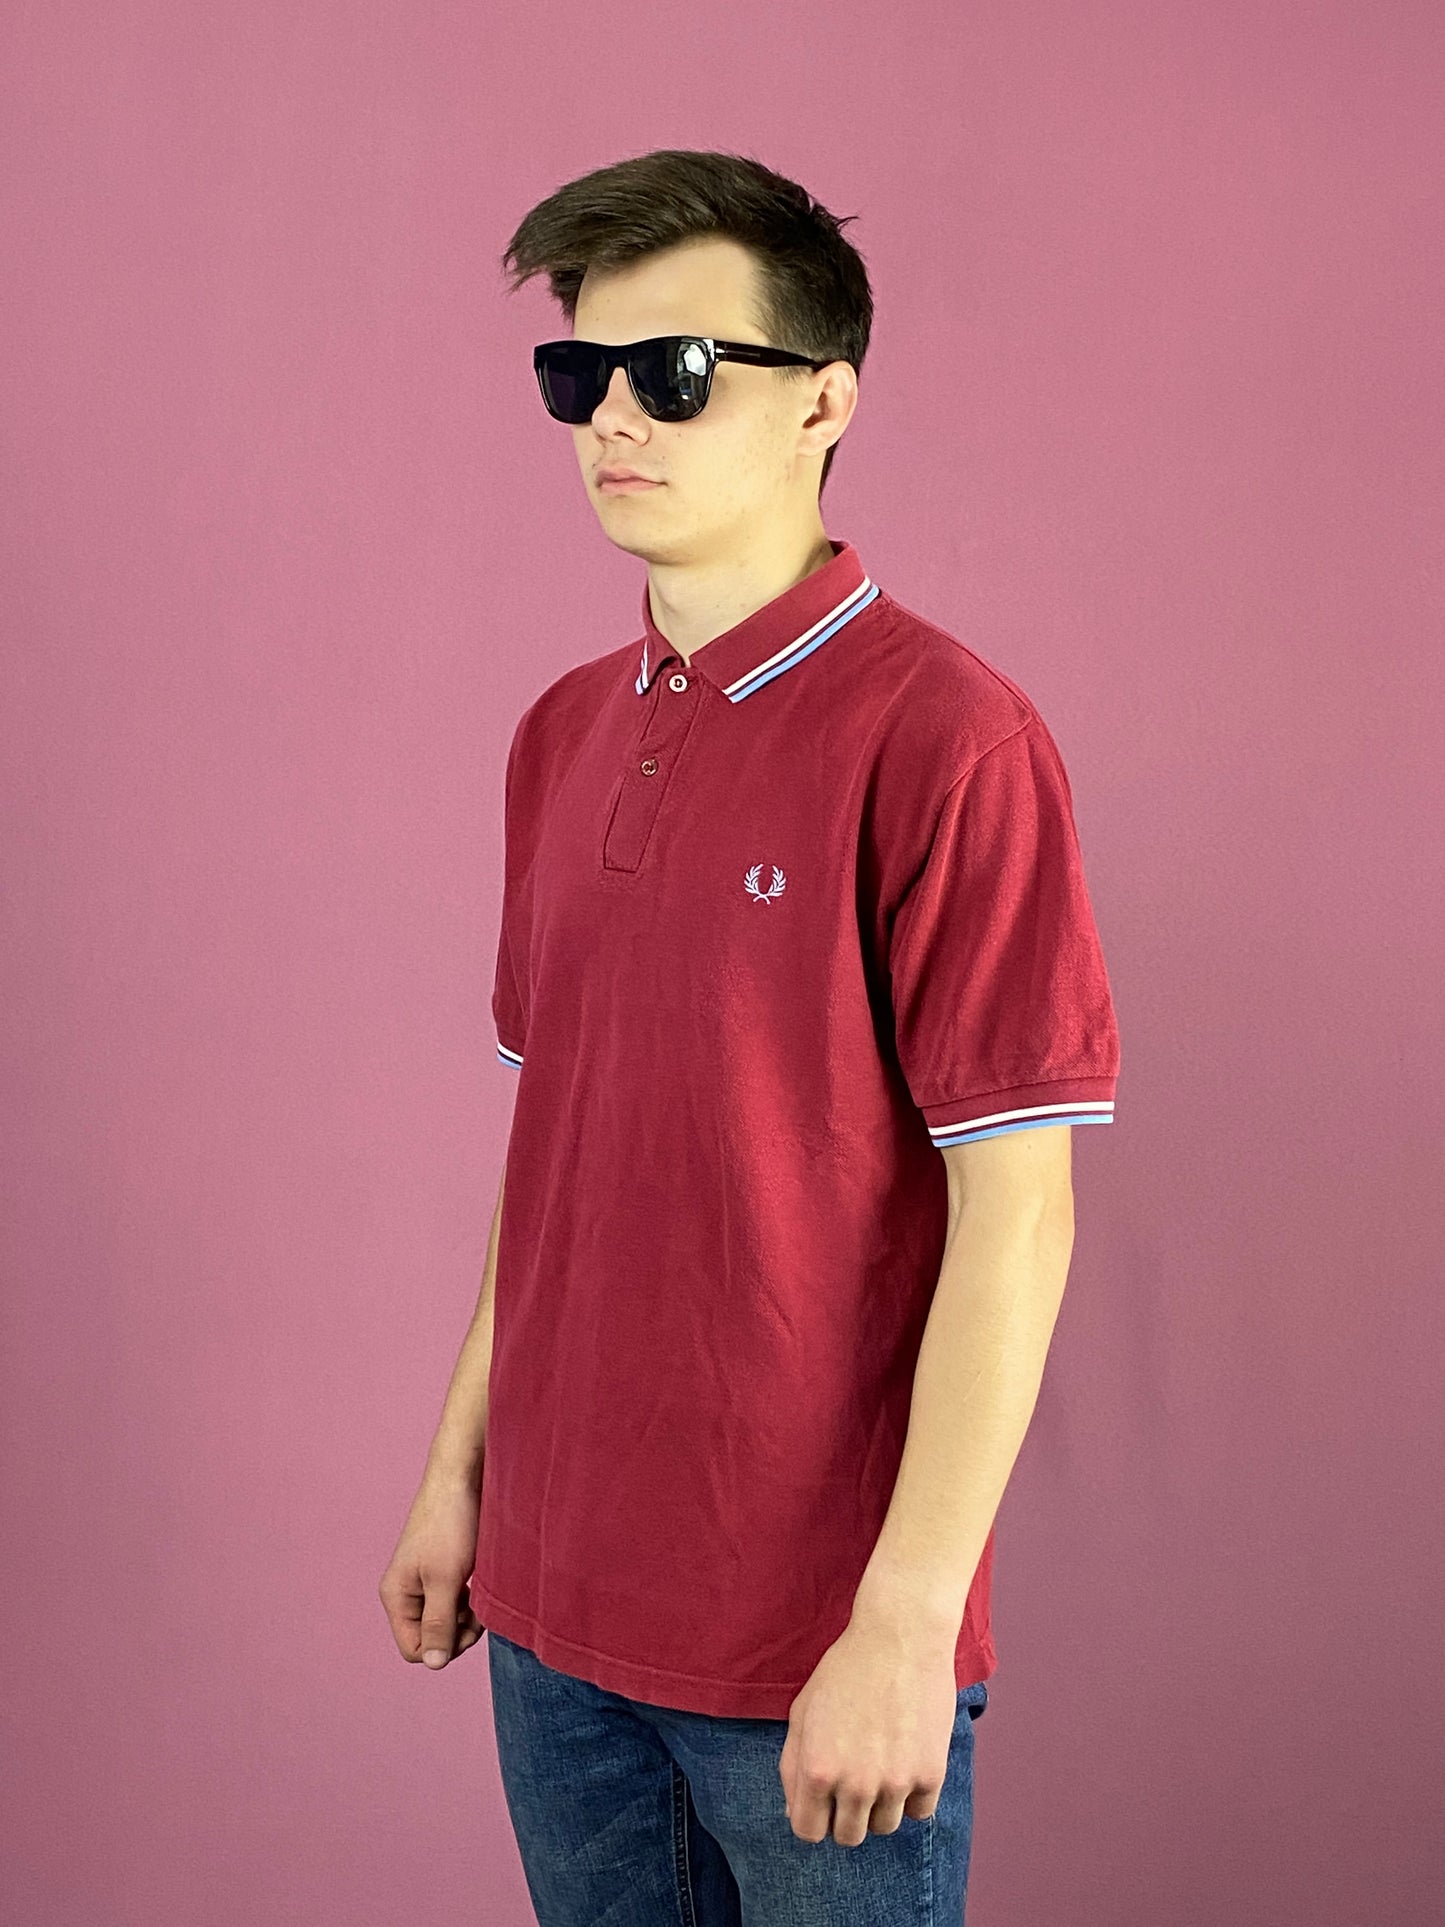 90s Fred Perry Vintage Men's Polo Shirt - Large Red Cotton